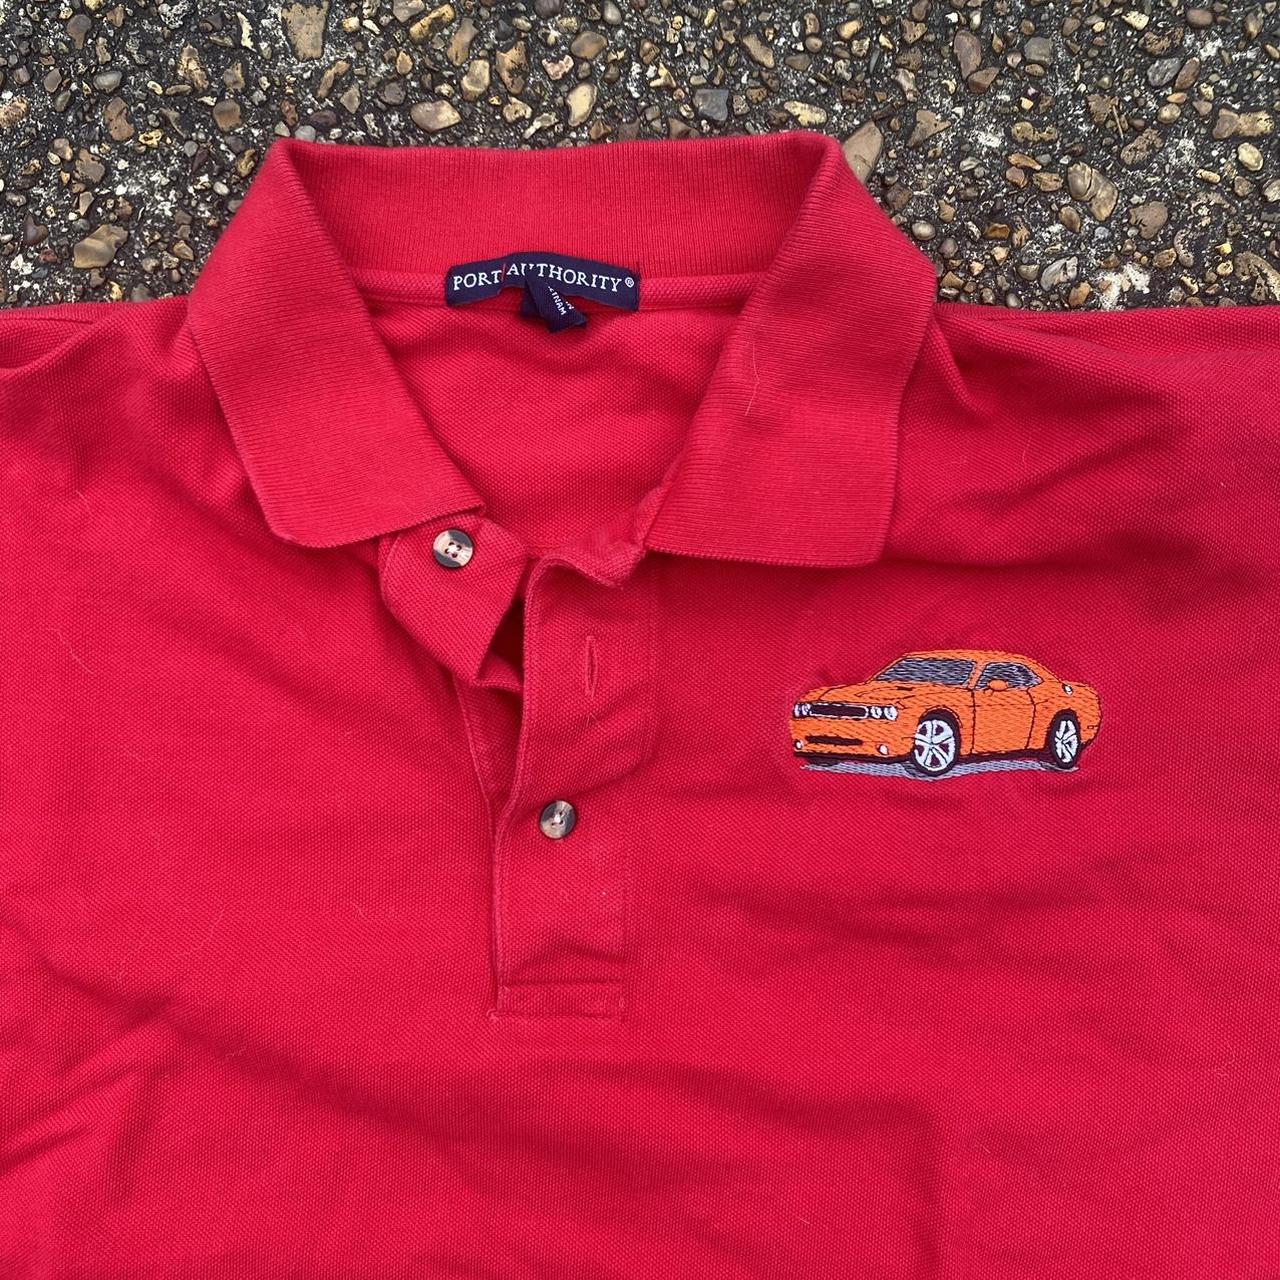 Men's Red and Orange Polo-shirts | Depop